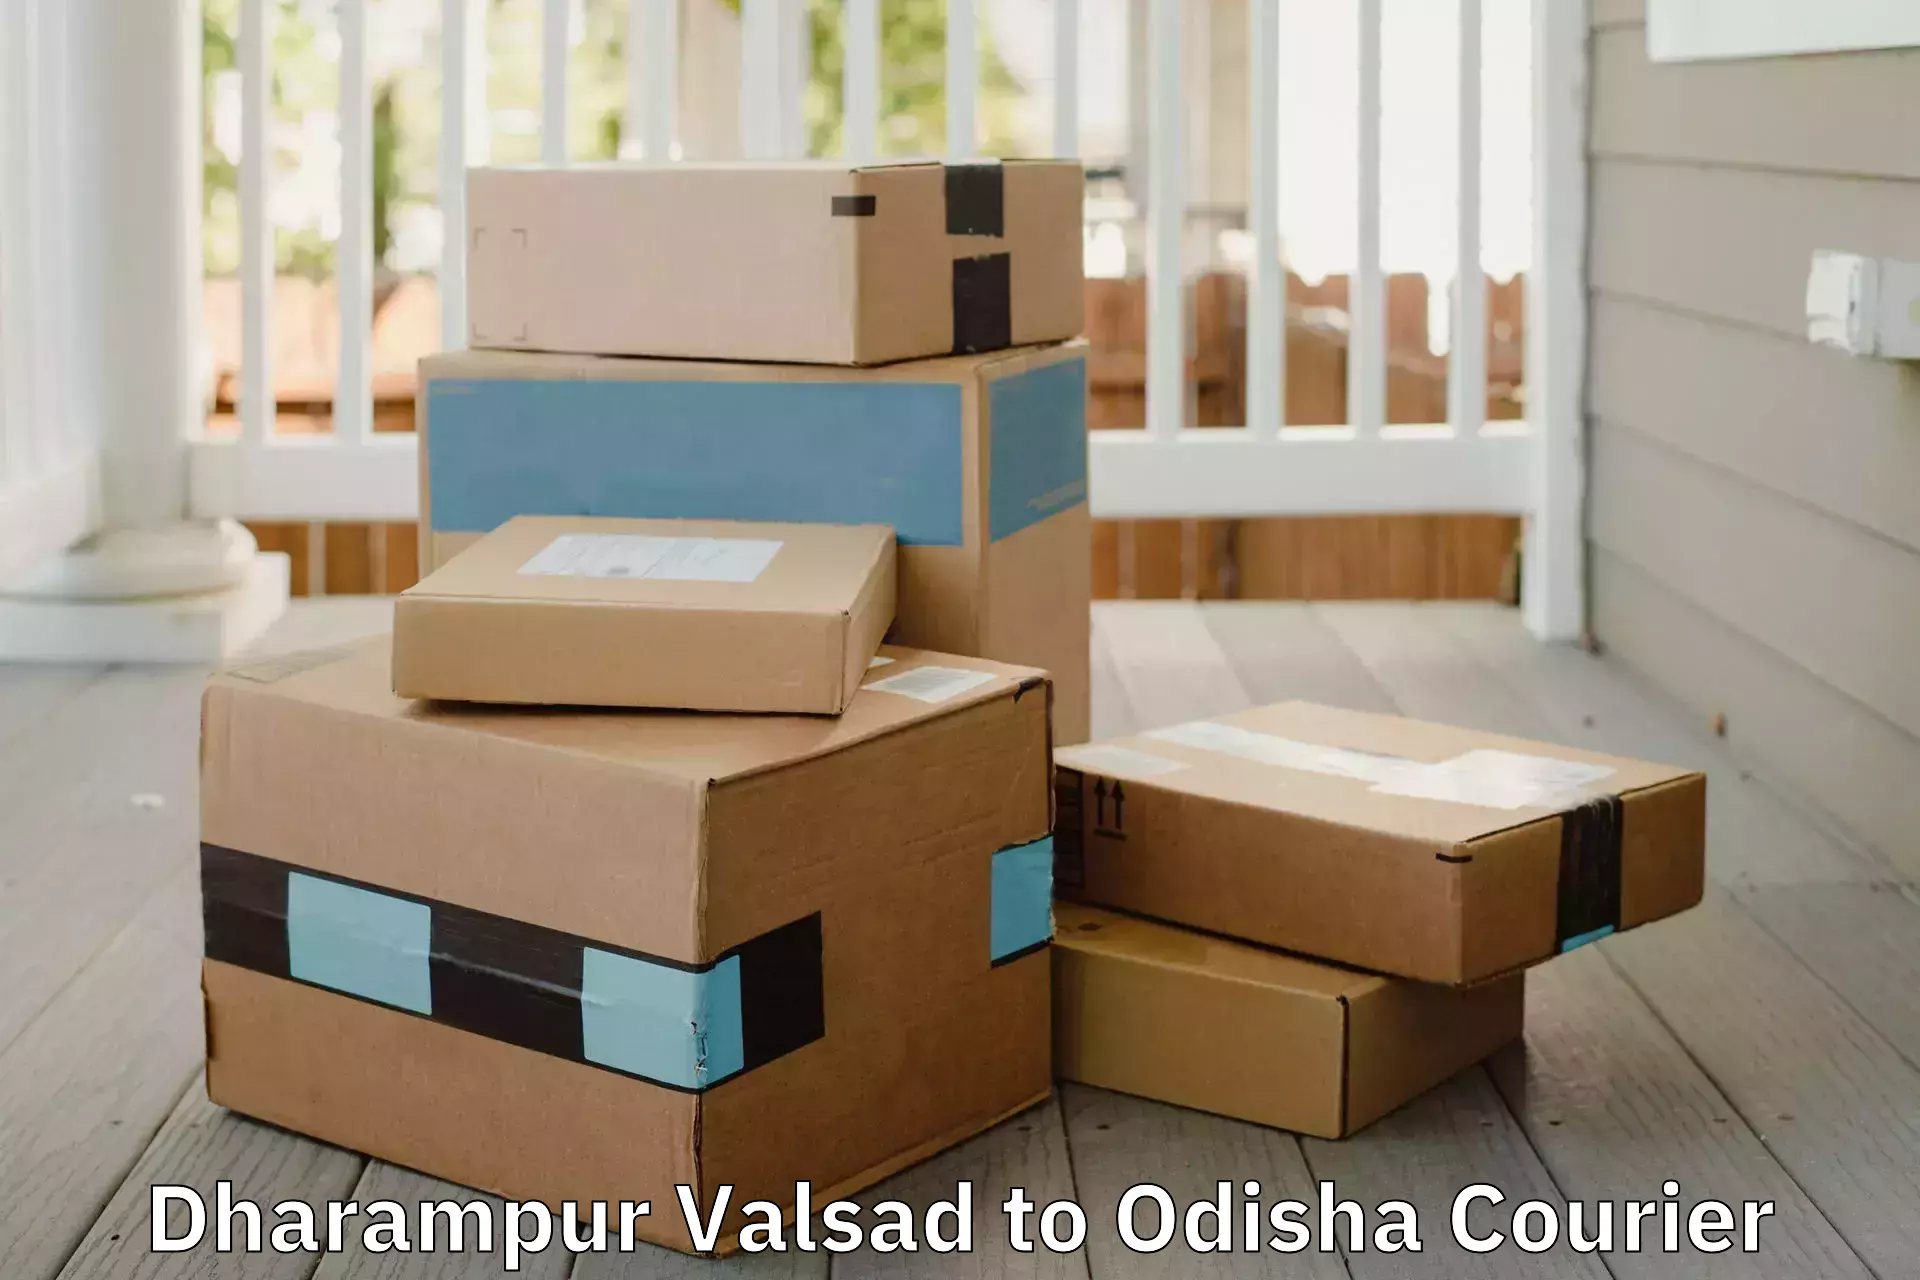 Reliable movers Dharampur Valsad to Basta